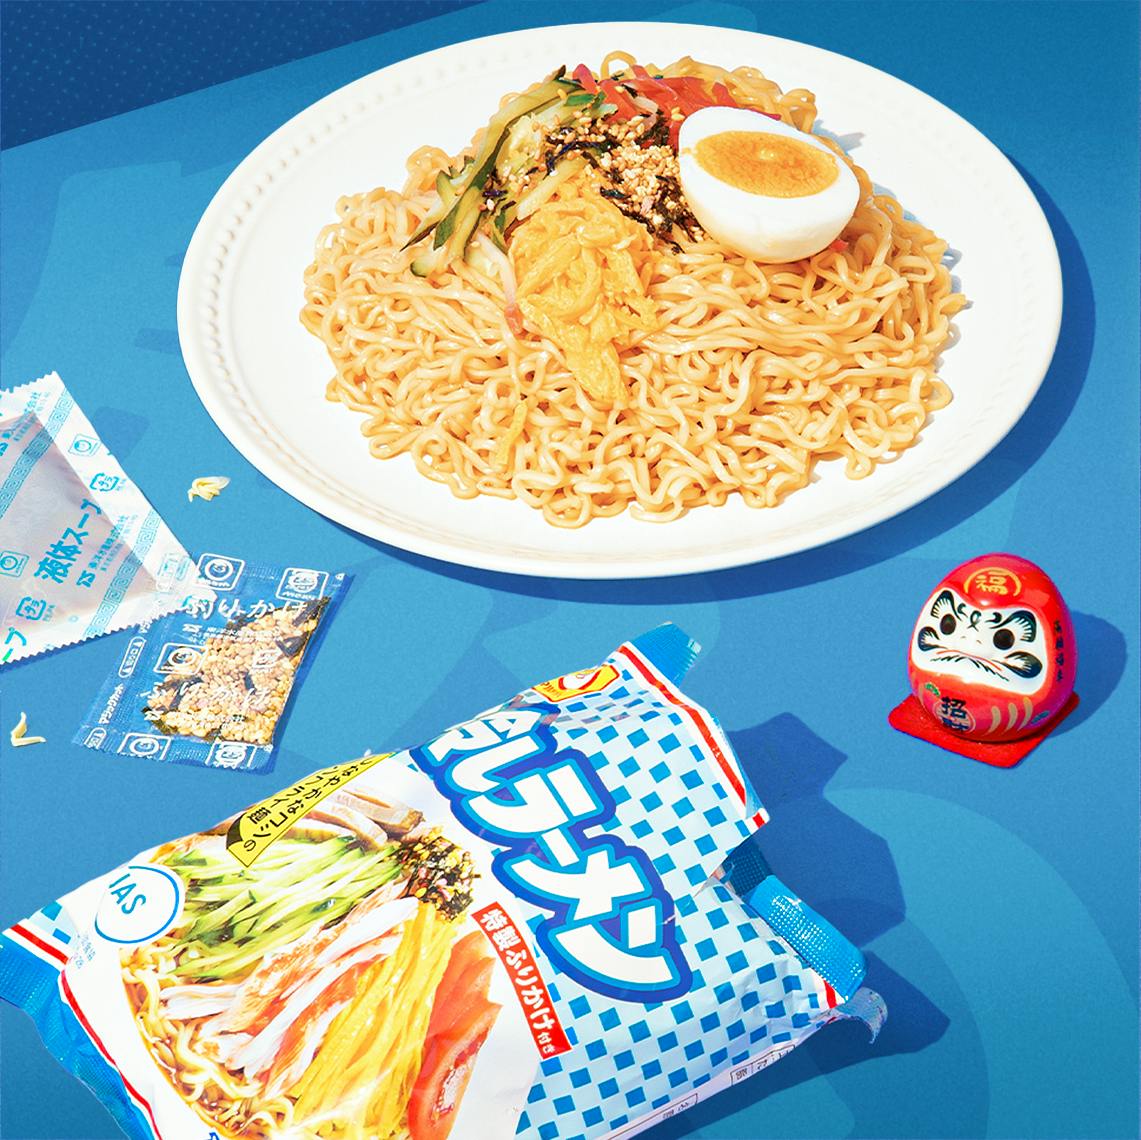 Hiyashi Ramen sits on a blue background, surrounded by Japanese summer festival motifs.